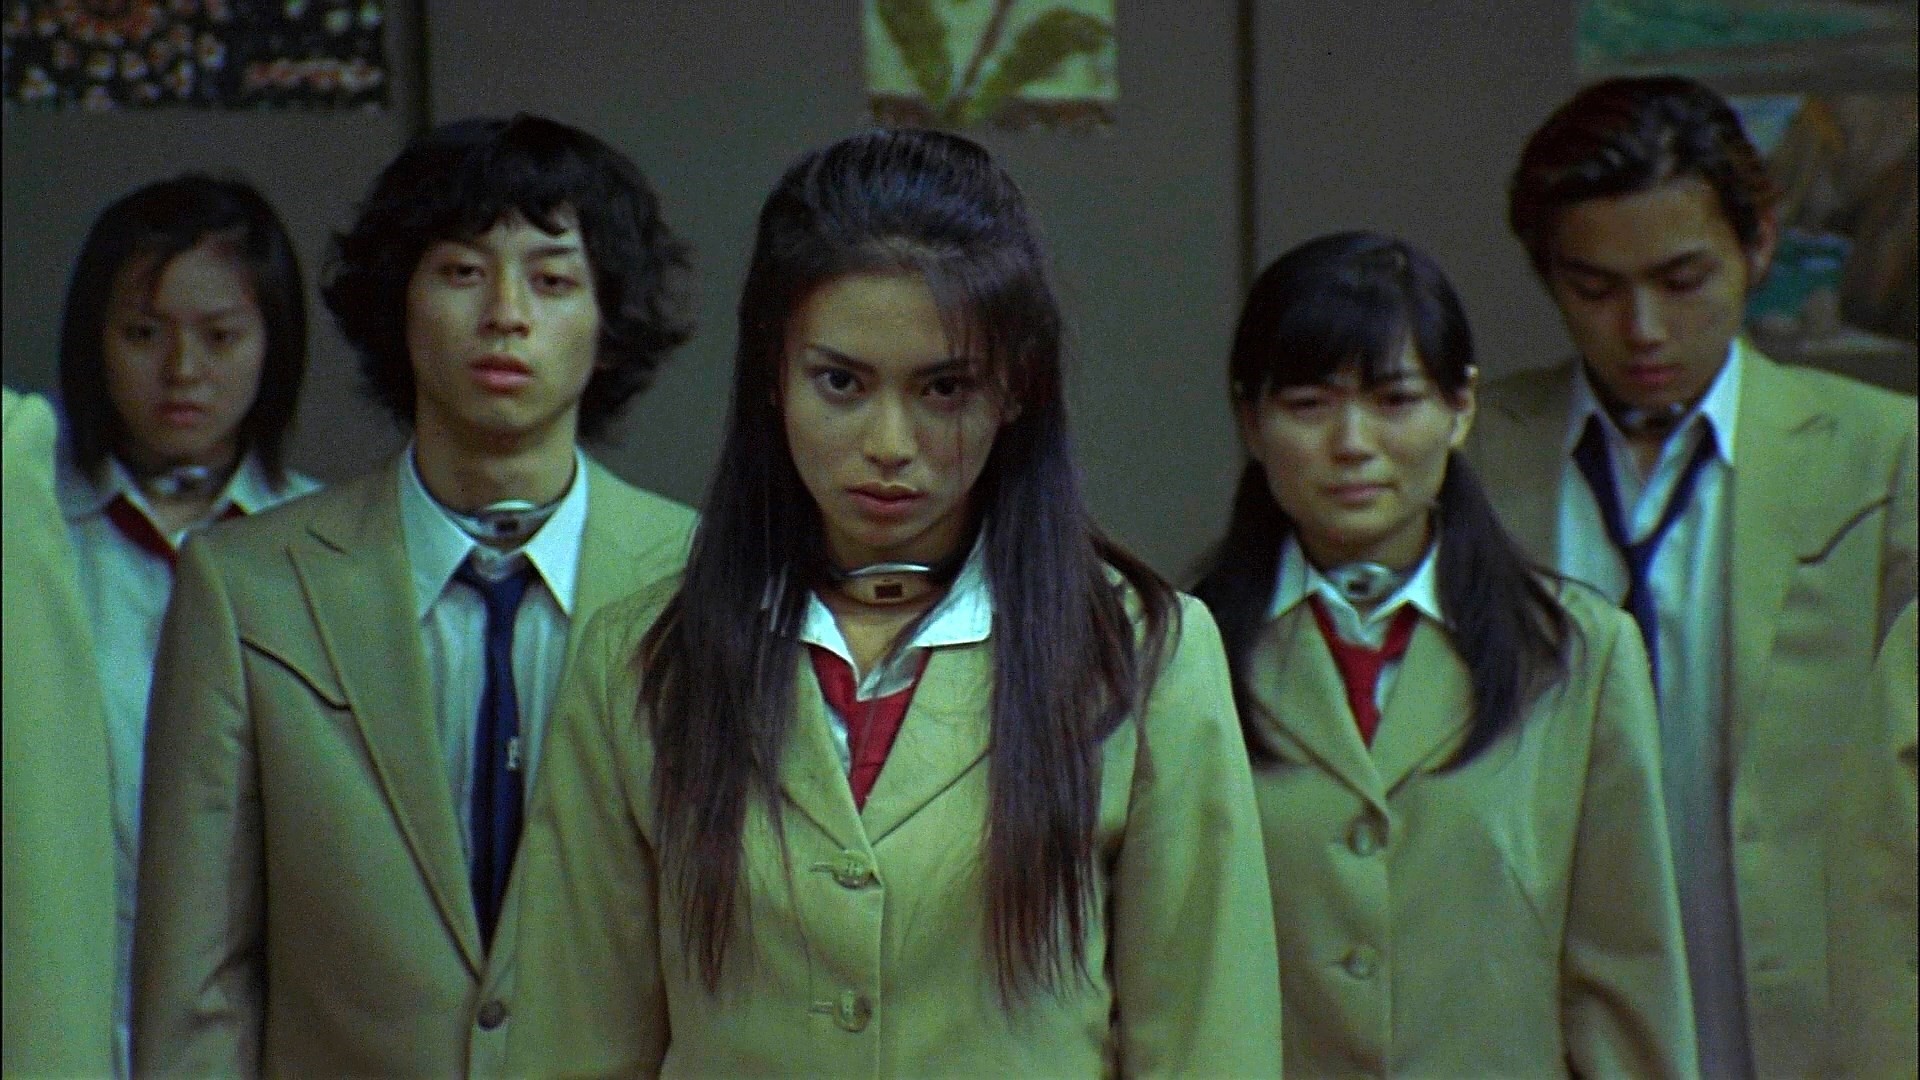 Asian Schoolgirl Hd - How Japan's 90s teen delinquency crisis inspired a wave of killer movies |  Dazed